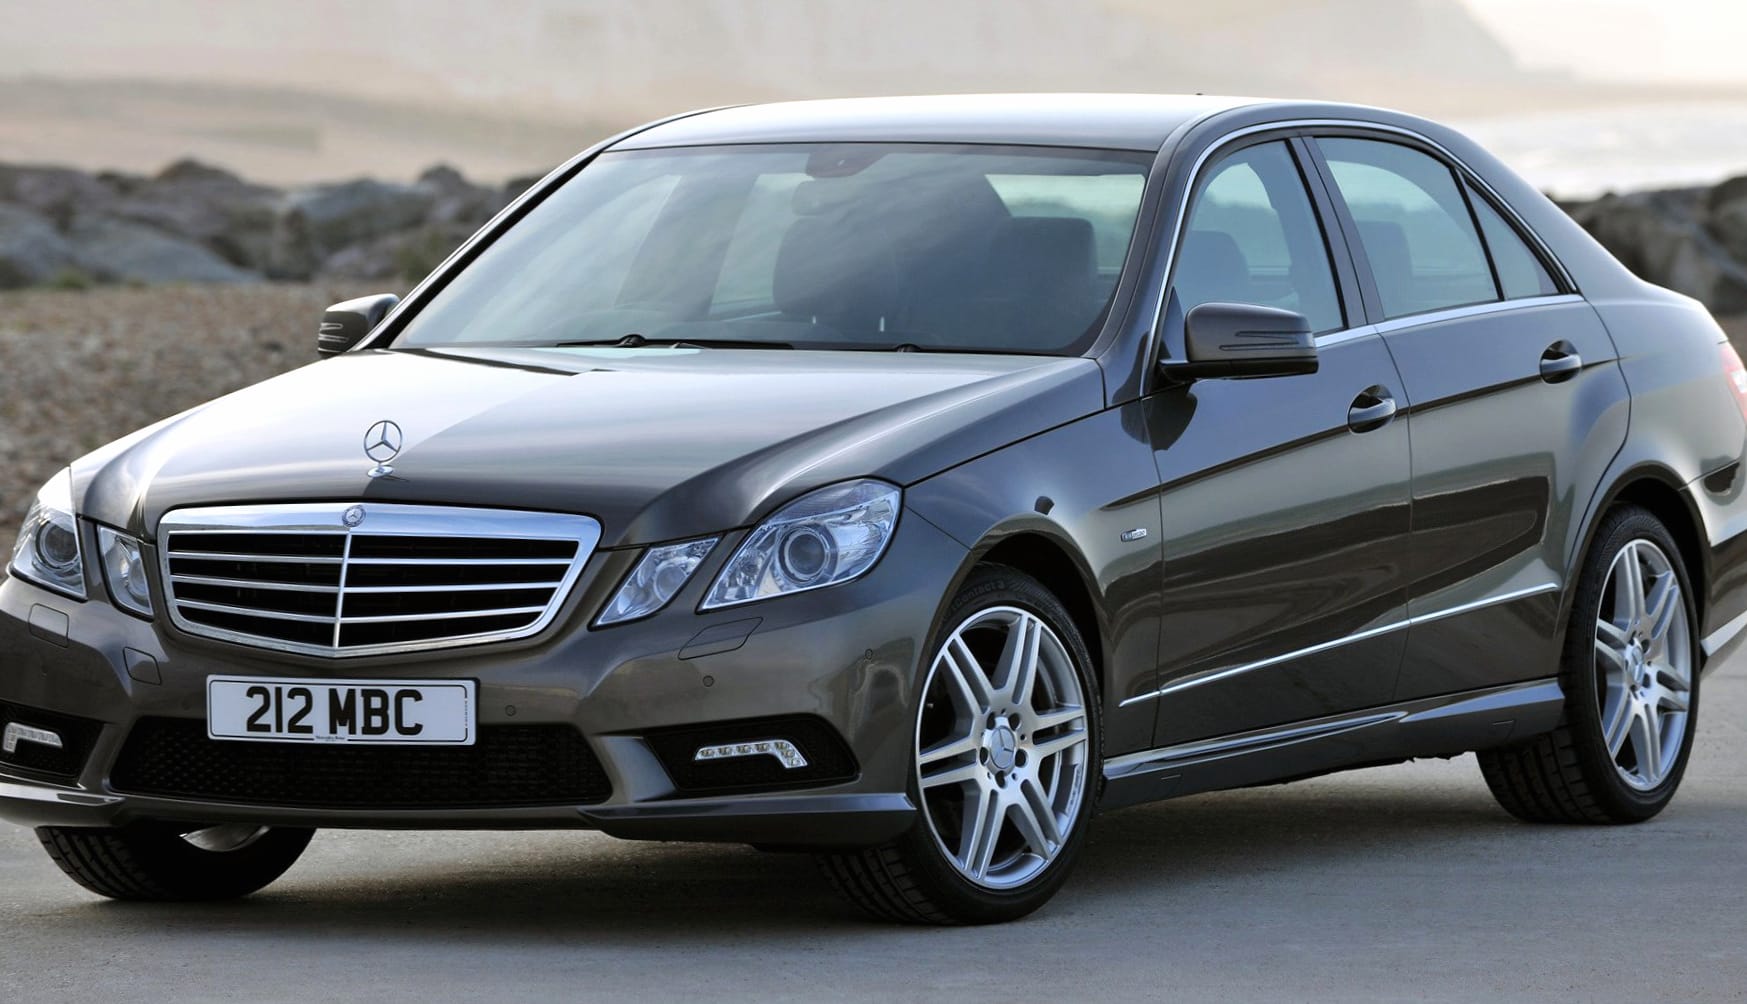 Mercedes-Benz E 220 CDI AMG Styling wallpapers HD quality